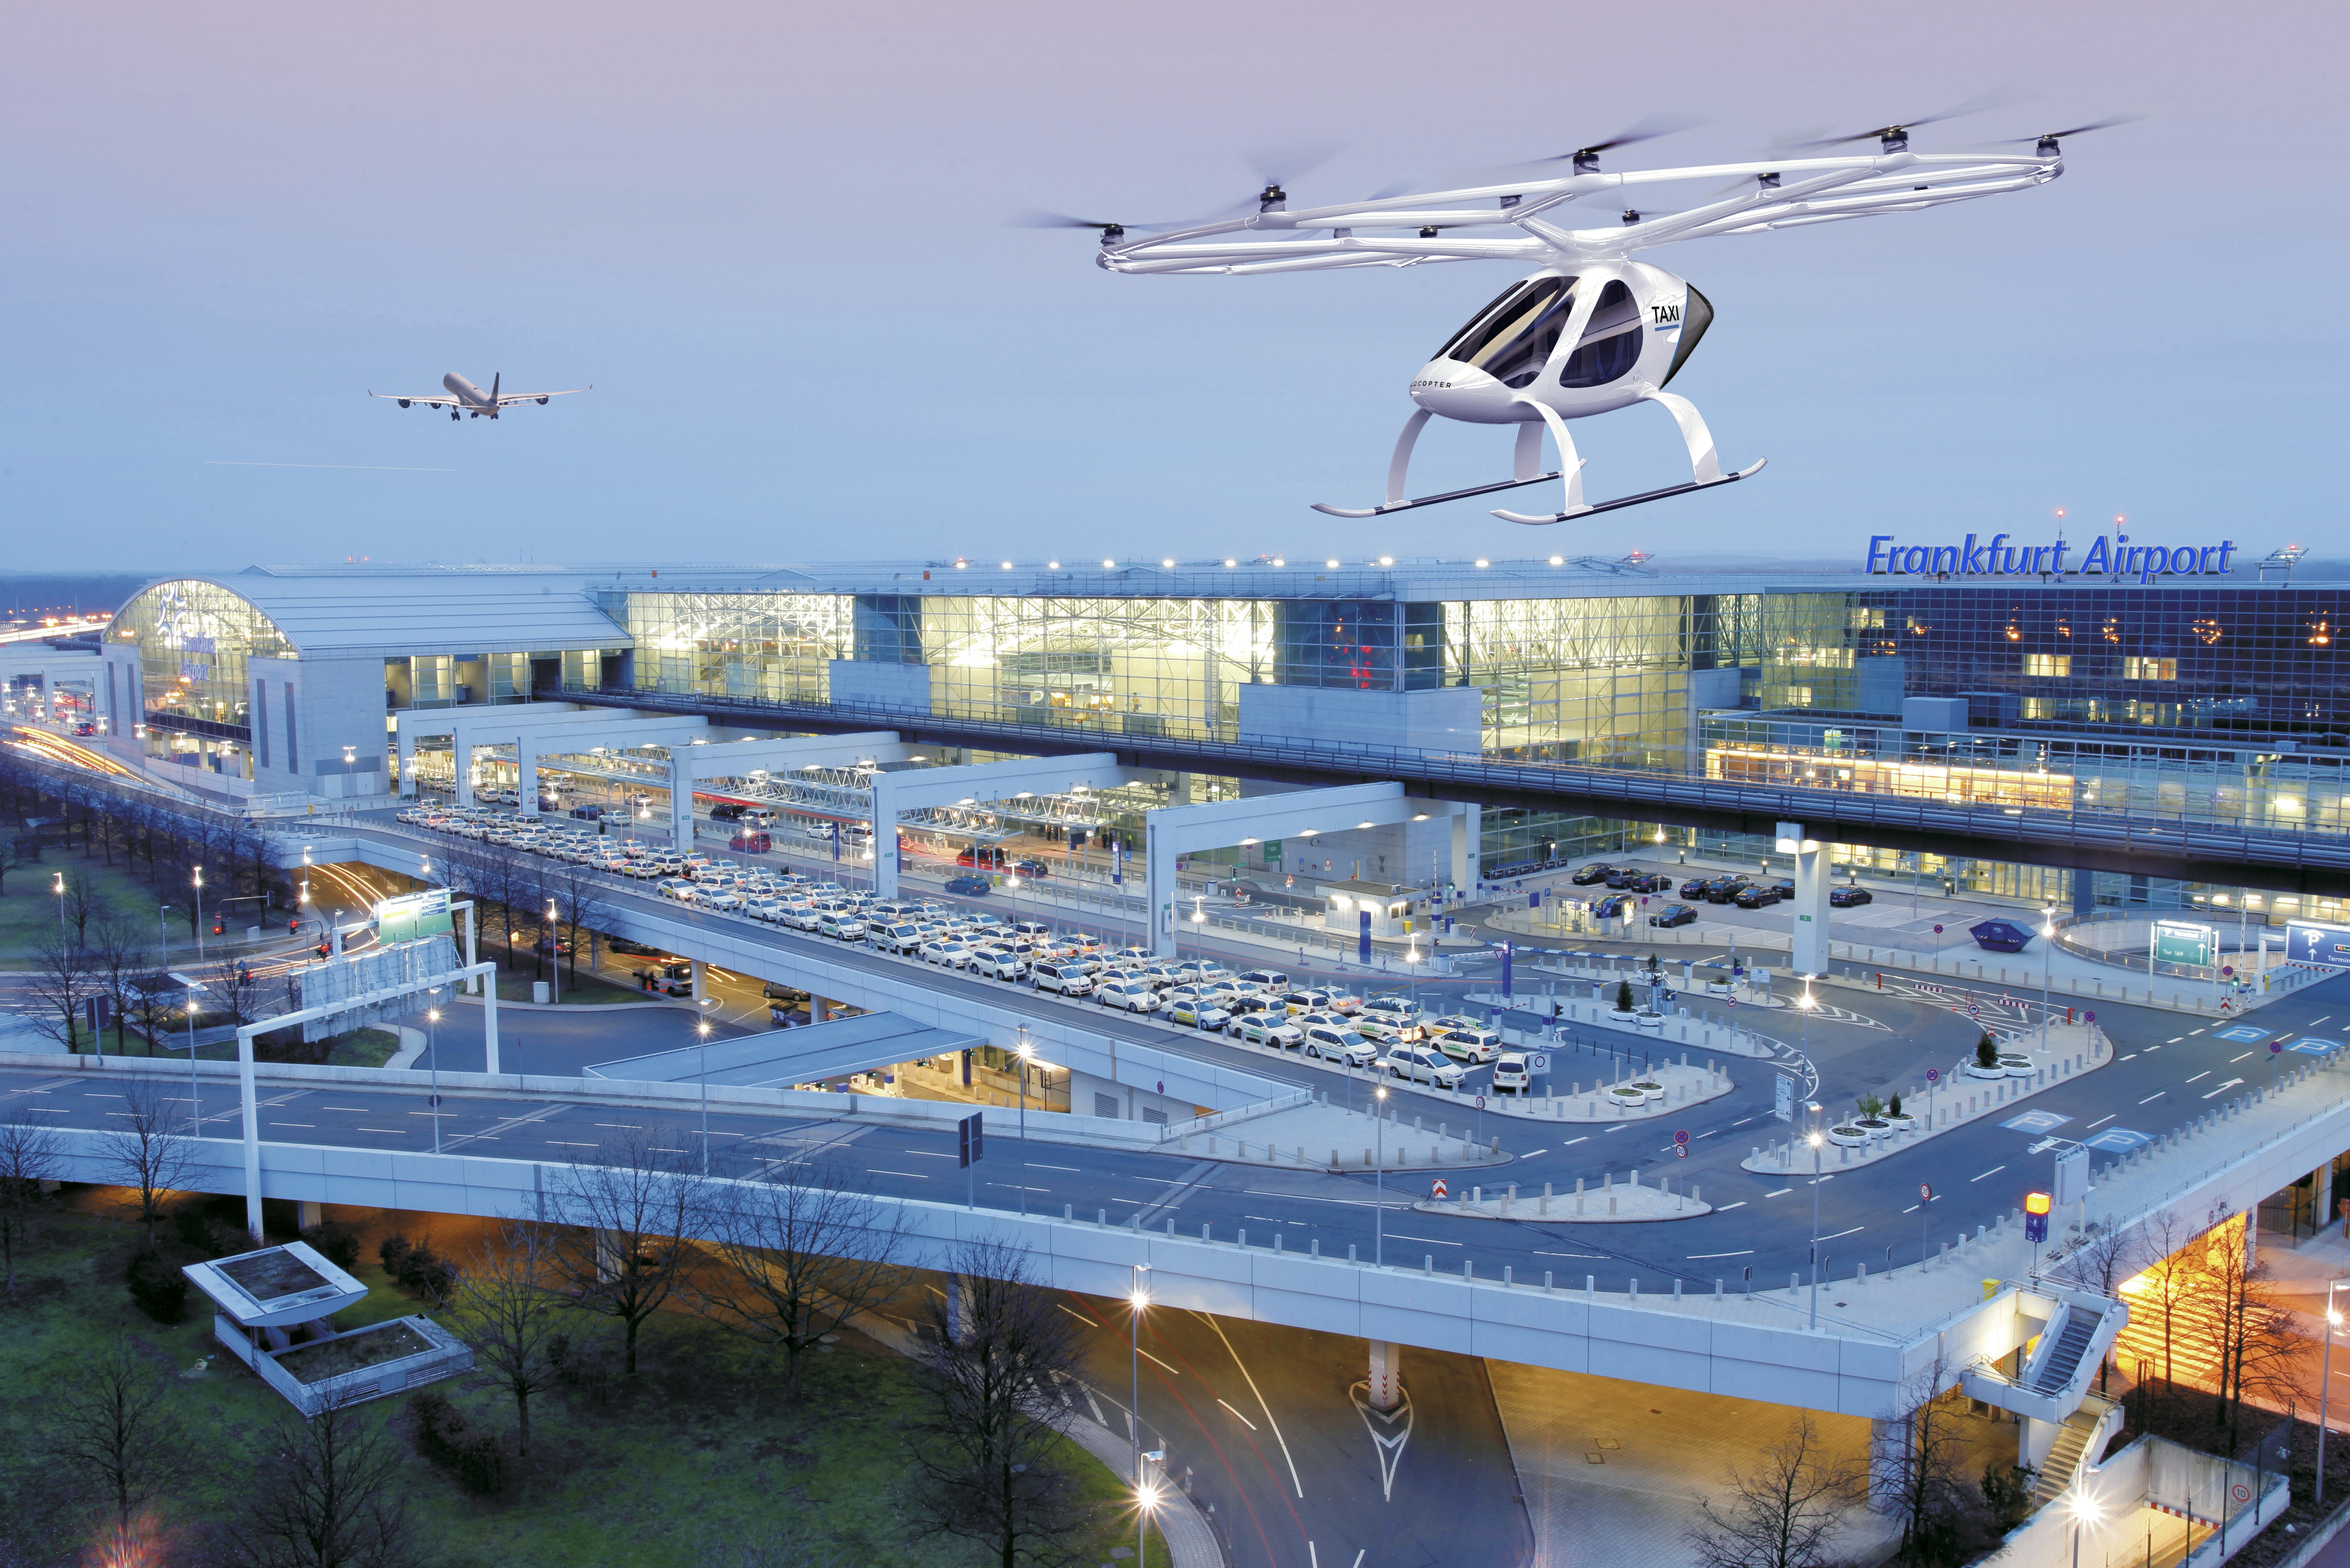 Frankfurt Airport, Volocopter to research air taxi connection concepts - Unmanned airspace